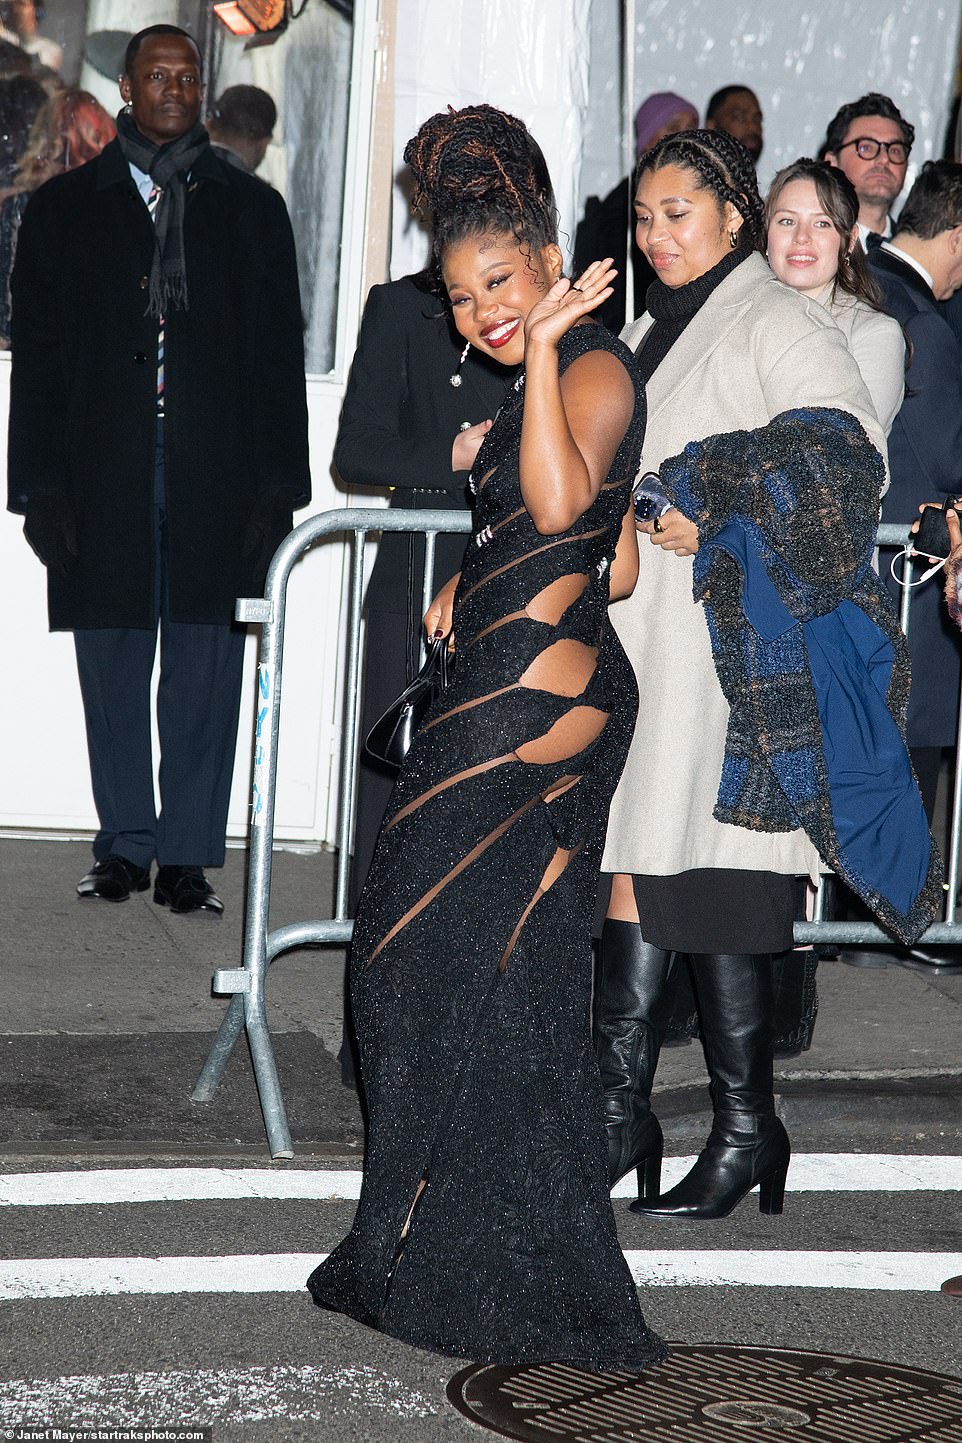 Turning heads: Fishback exuded glamour in her figure-hugging black cutout dress